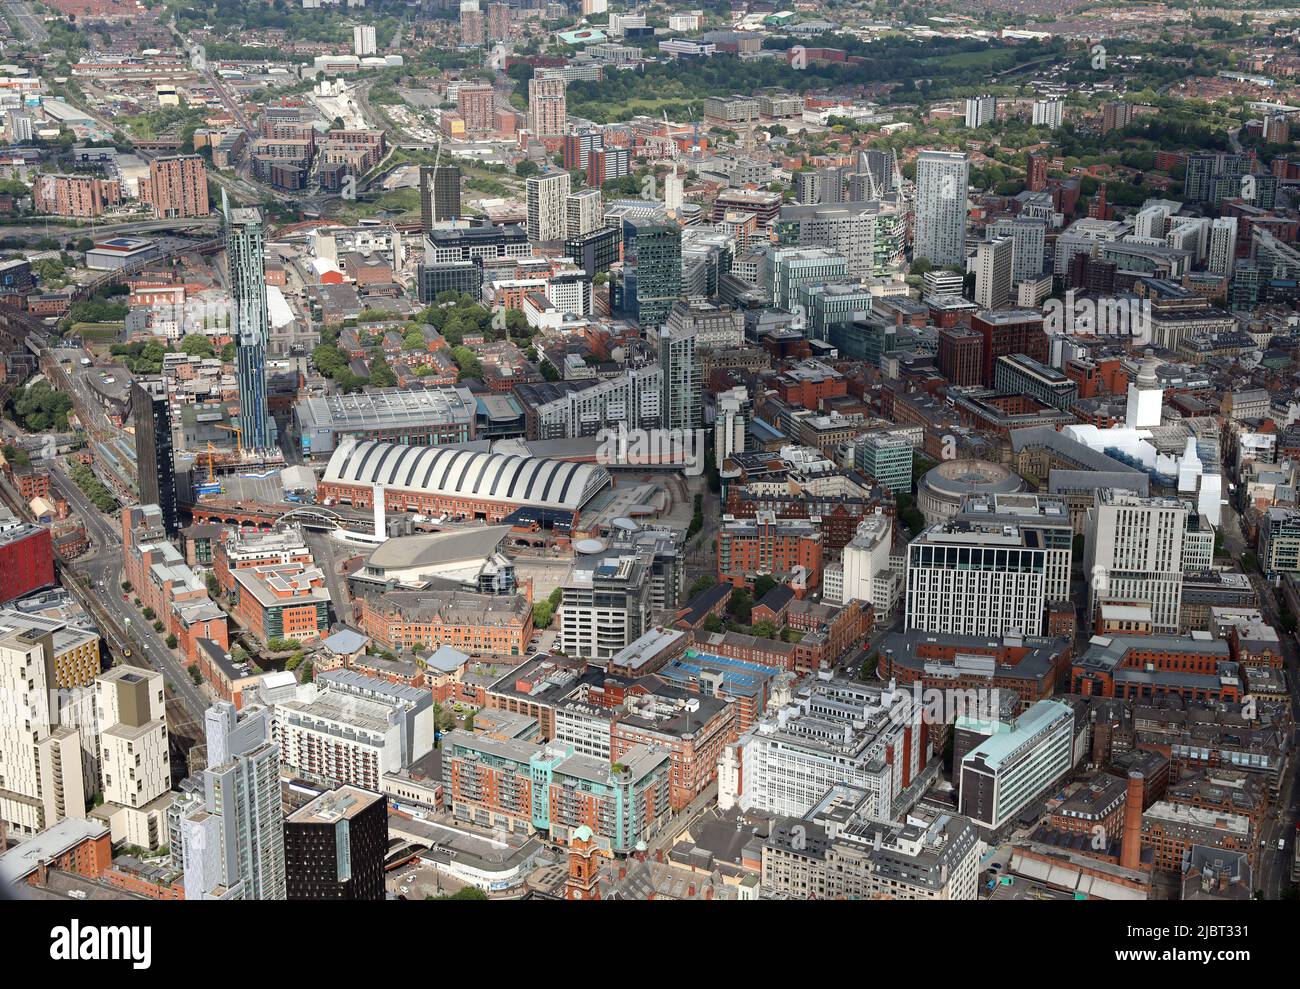 aerial view of Manchester city centre viewed from over Oxford Street Station looking west Stock Photo